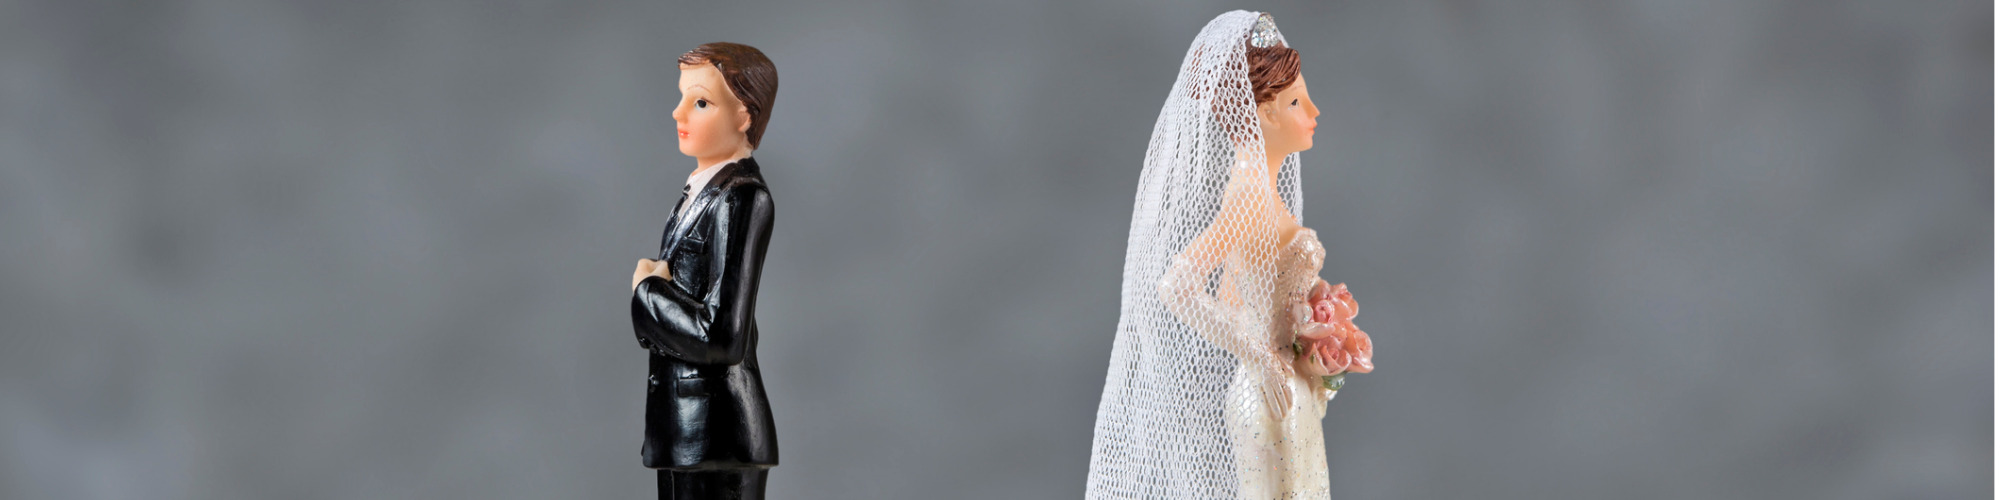 Matrimonial & Non-Matrimonial Resources in Divorce - A Guide for Family Lawyers